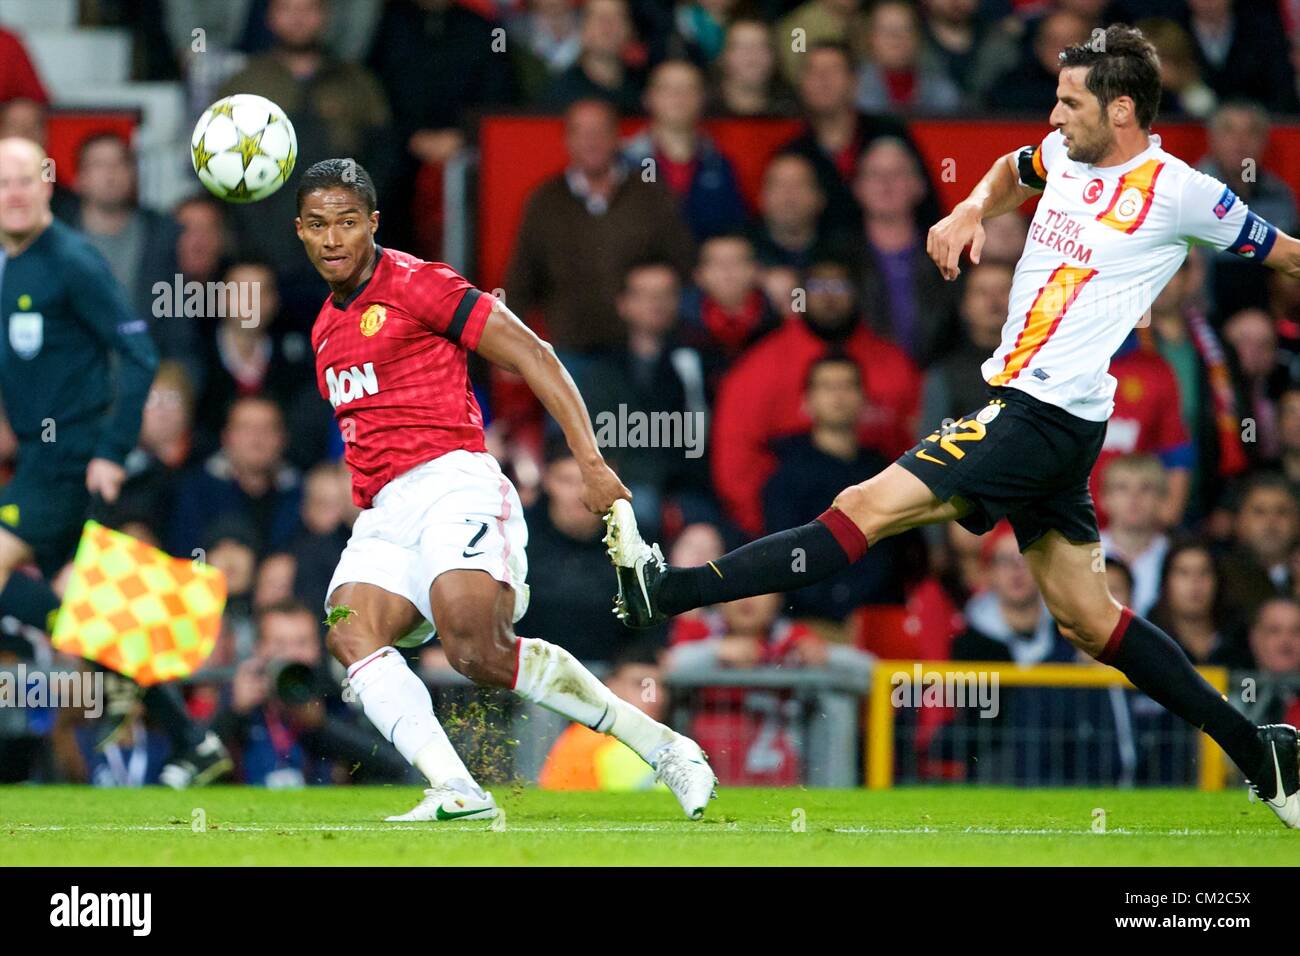 19.09.2012 Manchester, England. Manchester United's Ecuadorian midfielder Antonio Valencia and Galatasary's Turkish defender Hakan Balta in action during the group H Champions League Football Manchester United v Galatasaray from Old Trafford. Man United ran out winners by Carricks only goal 1-0. Stock Photo